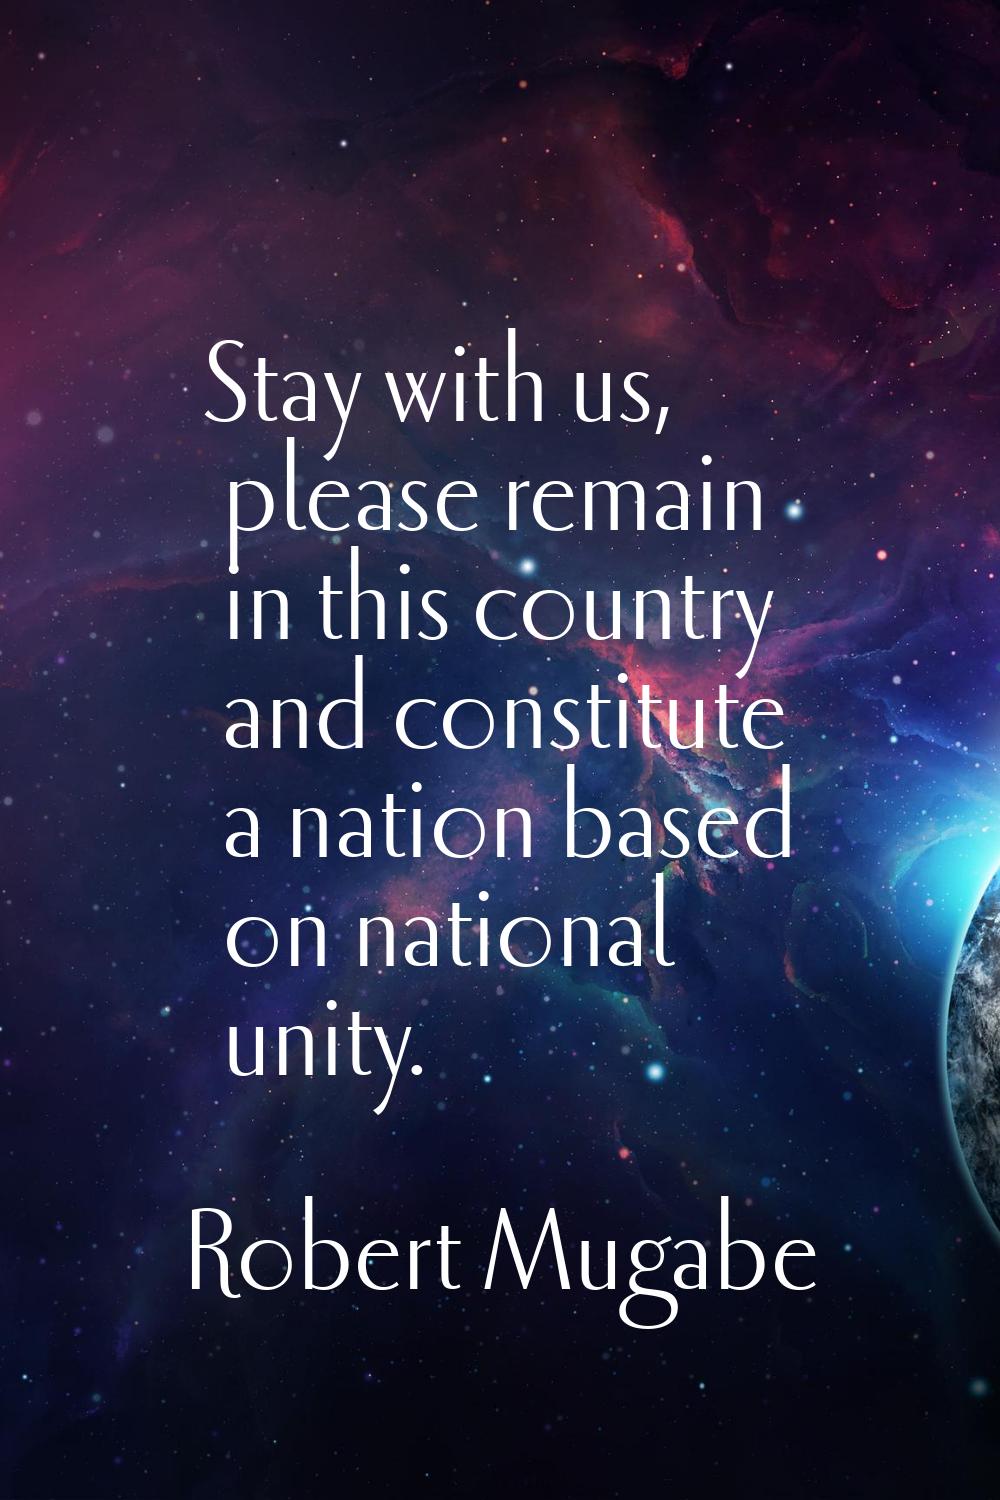 Stay with us, please remain in this country and constitute a nation based on national unity.